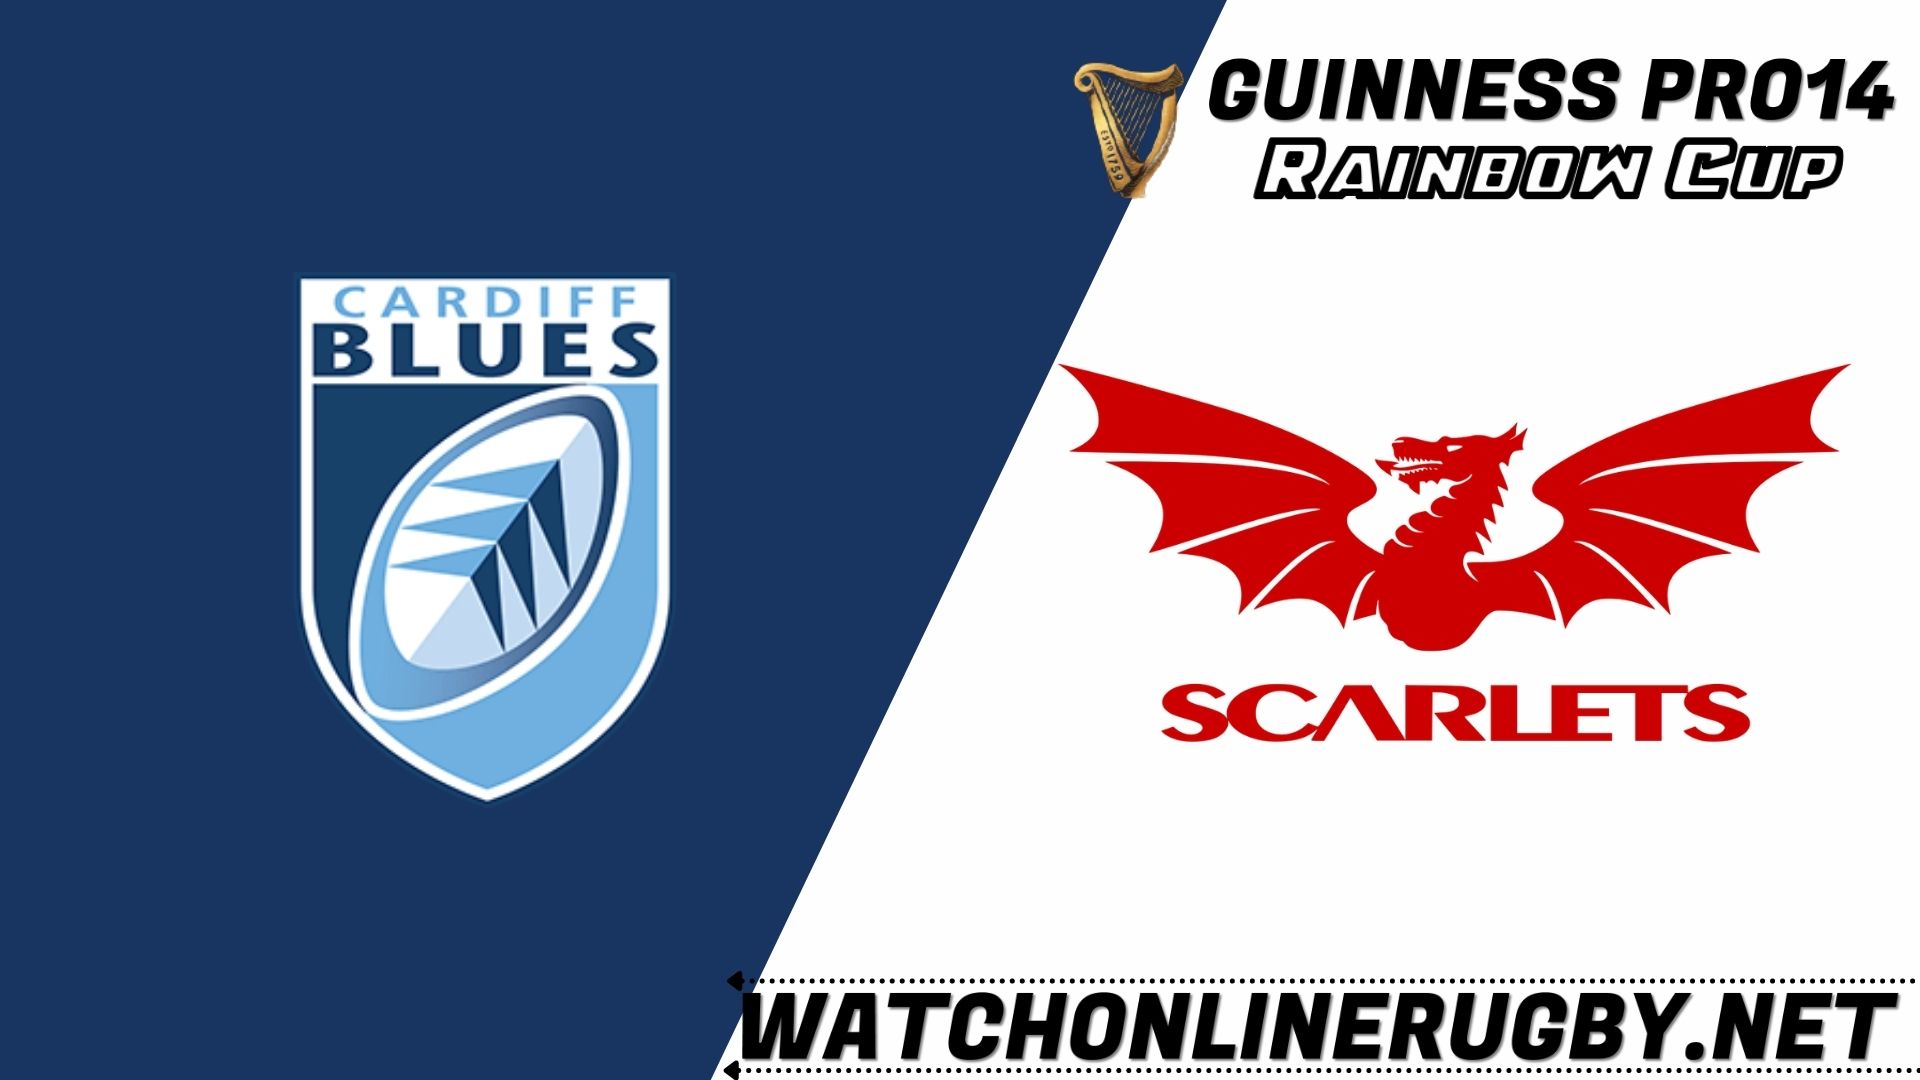 Scarlets Vs Cardiff Blues Rugby Live